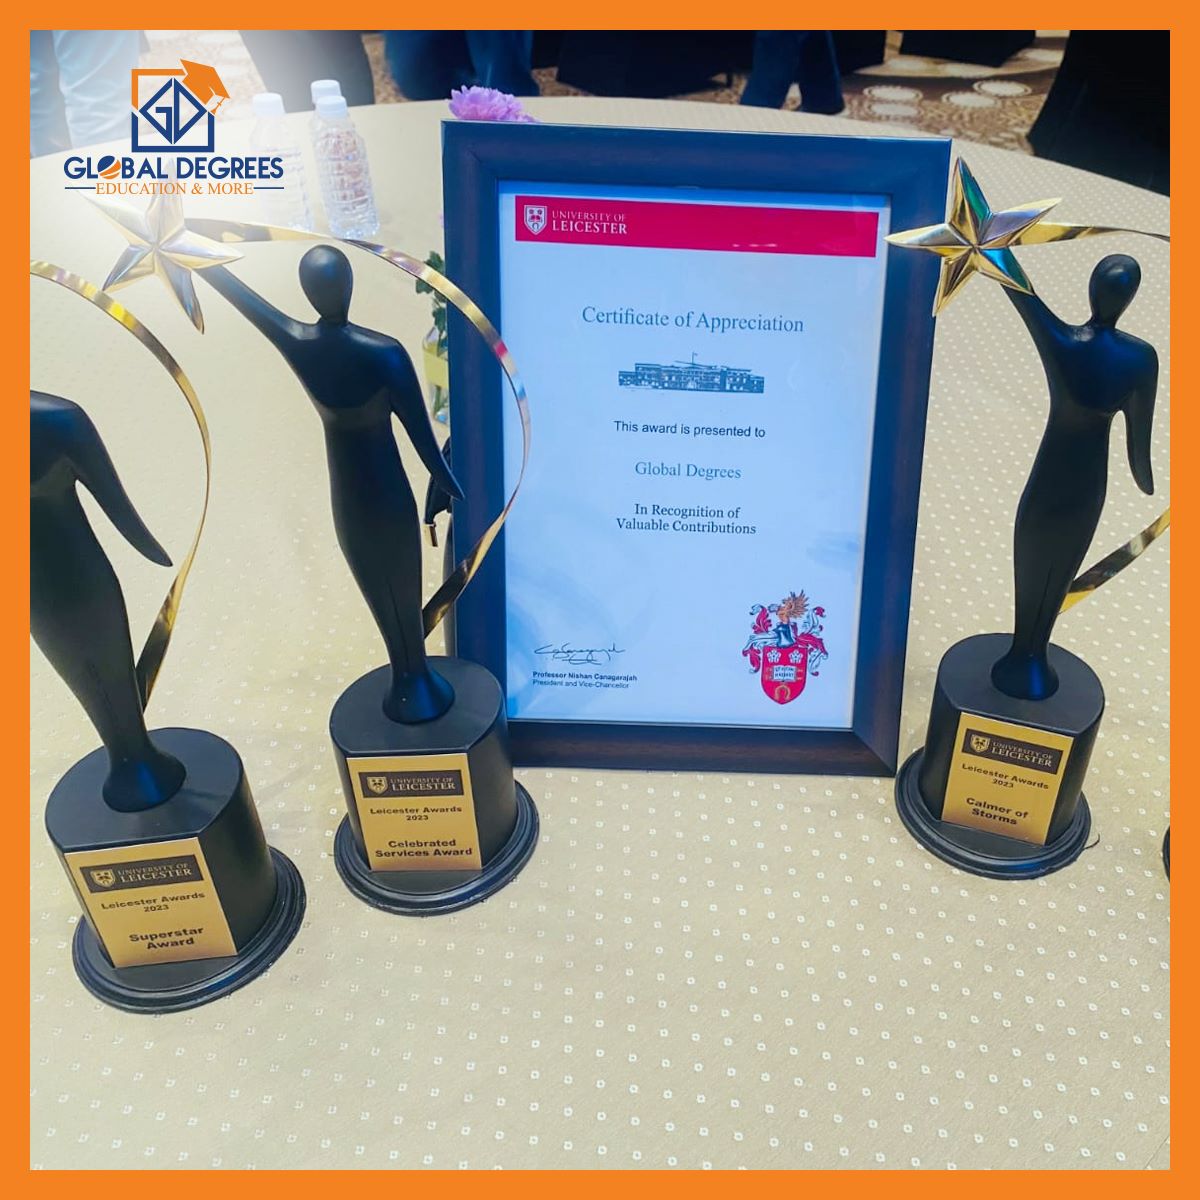 #congratulations to Team #globaldegrees on their impressive #accomplishment at the Leicester Awards 2023. 
Their exceptional #performance was recognized with a prestigious award from the #universityofleicester, UK. Well done, #teamglobaldegrees

#proudmoment #inspiringstudents